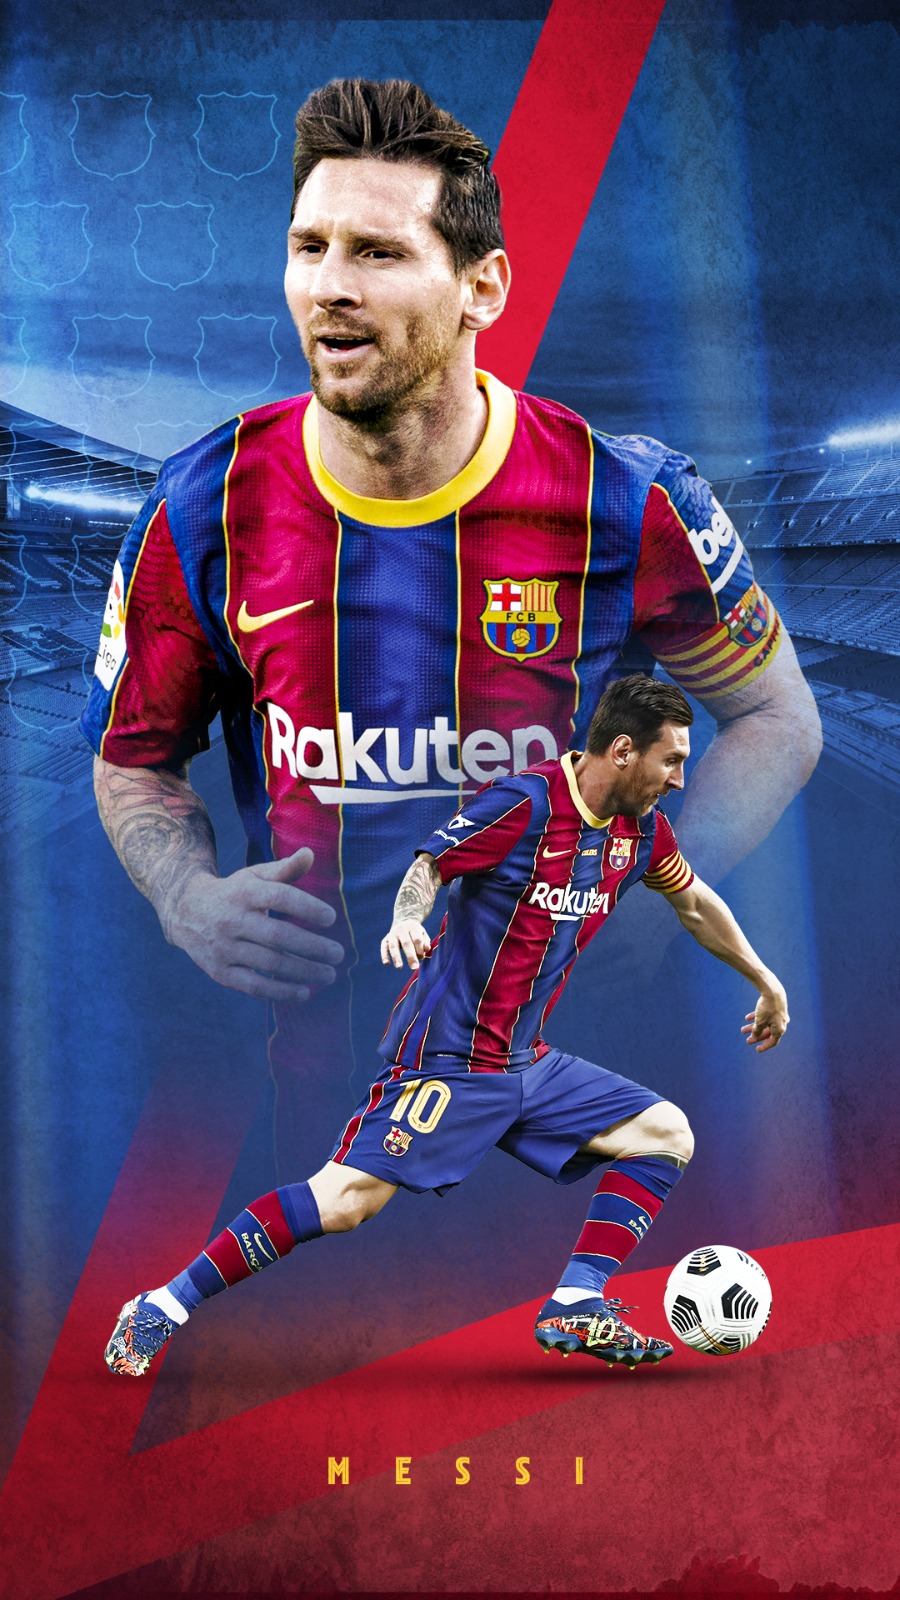 The Messi Wallpaper